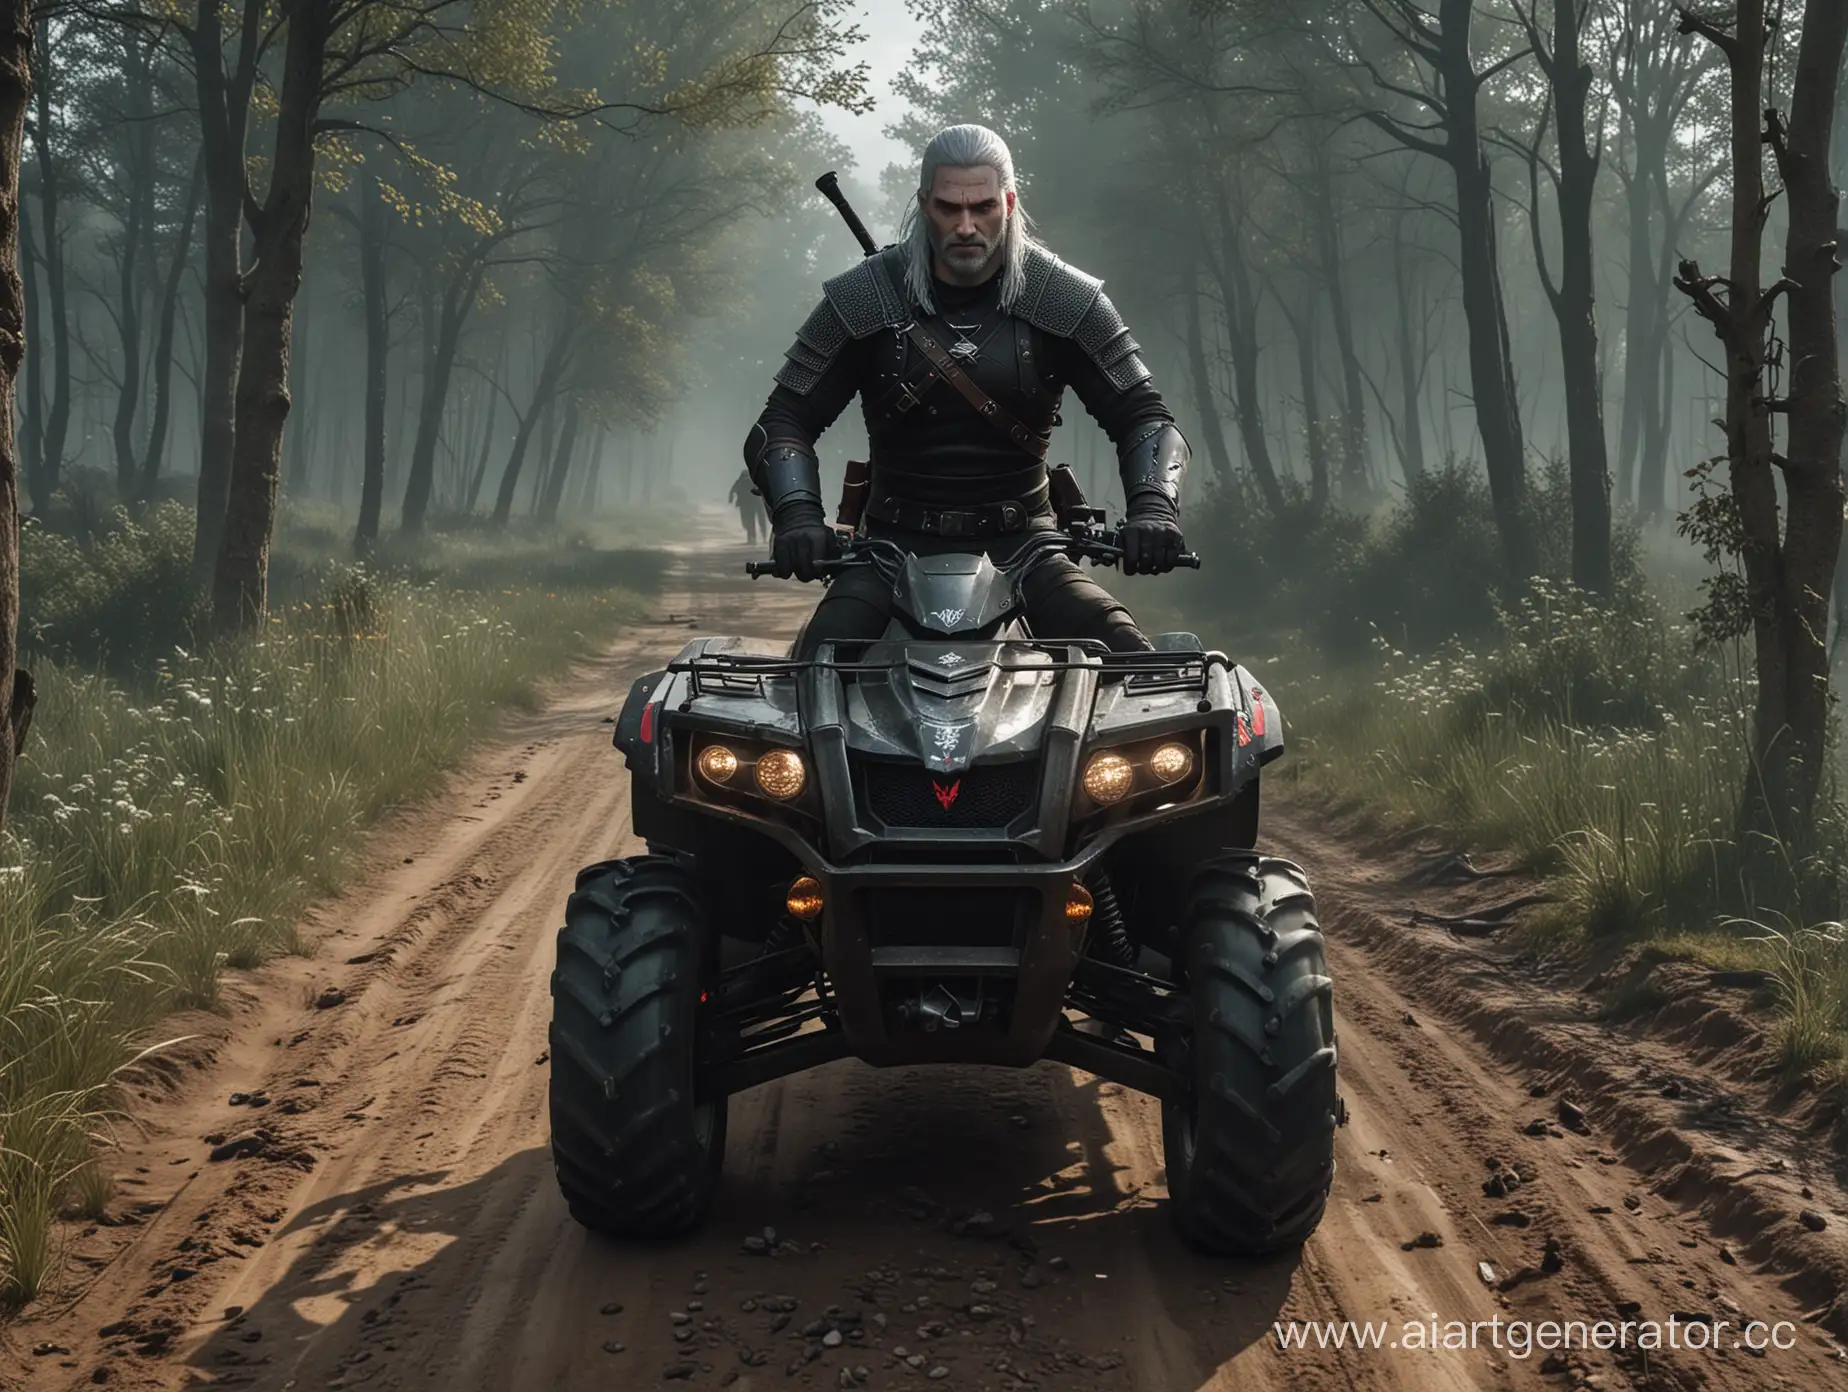 Witcher-Riding-a-Quad-Bike-through-Enchanted-Forest